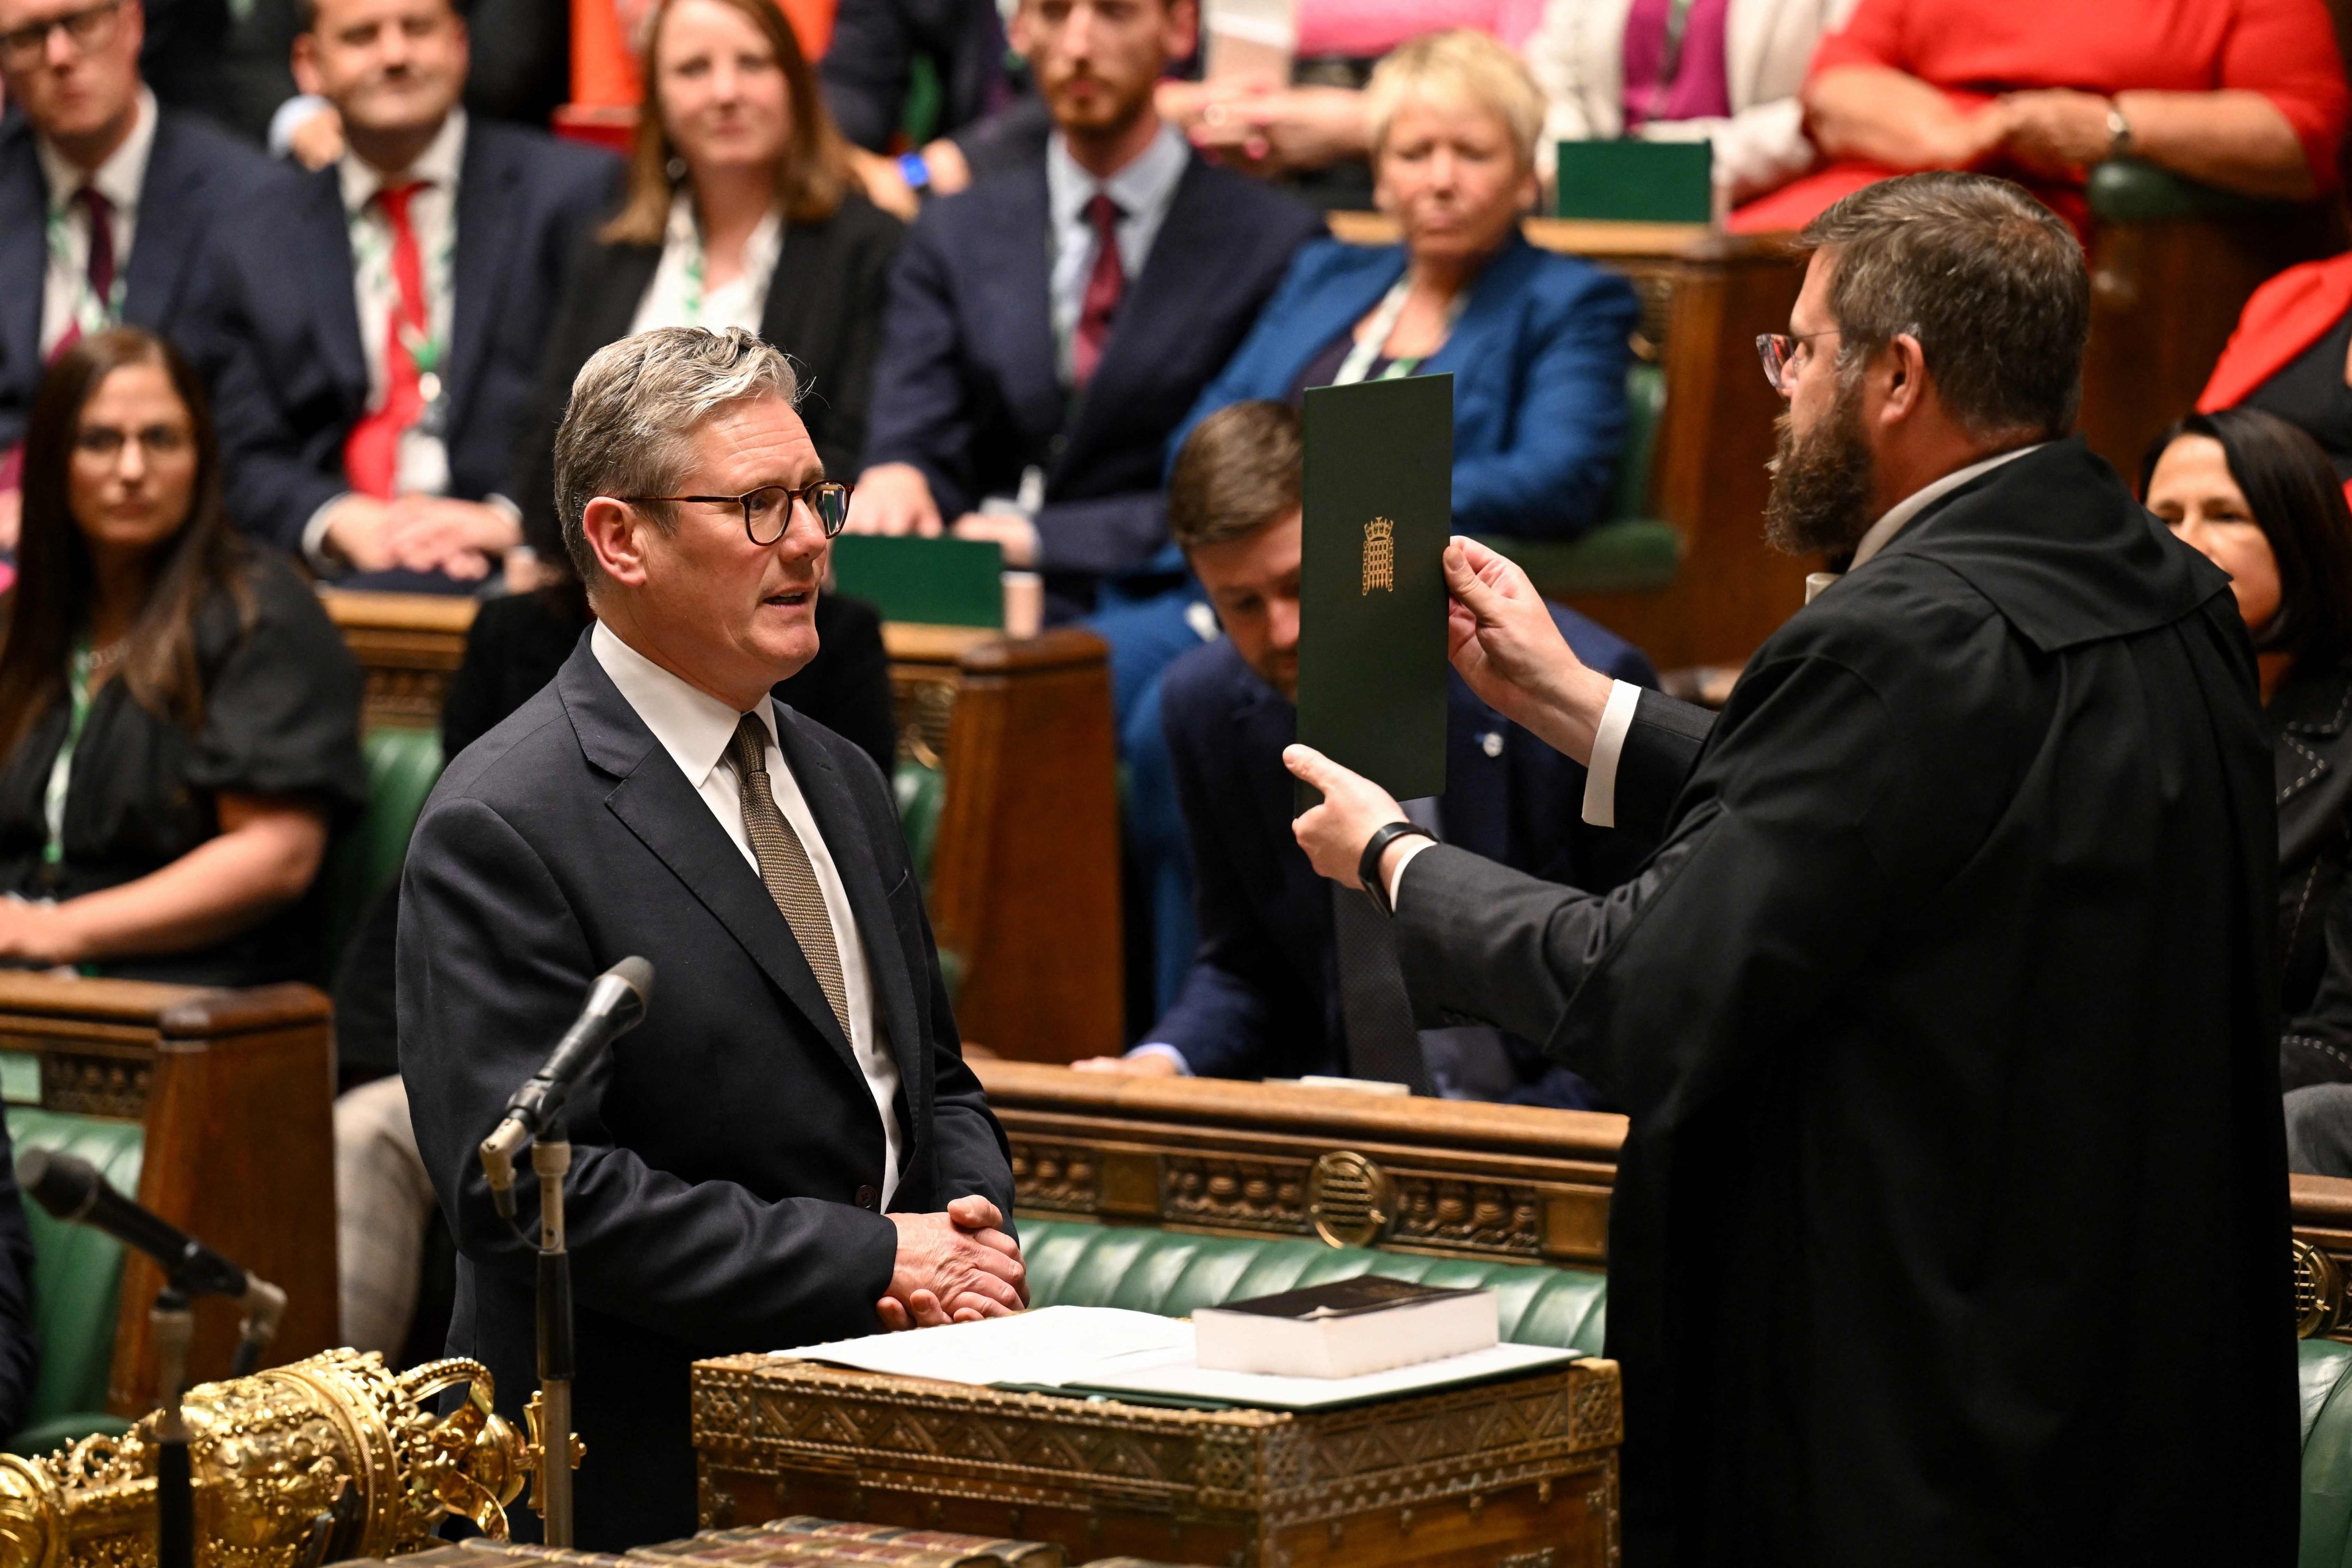 Keir Starmer is sworn in as British prime minister as members of parliament meet for the first time since the general election, at the House of Commons in London on July 9. Starmer’s Labour Party has a large majority but also a wide array of problems to solve after 14 years of Conservative government. Photo: Handout